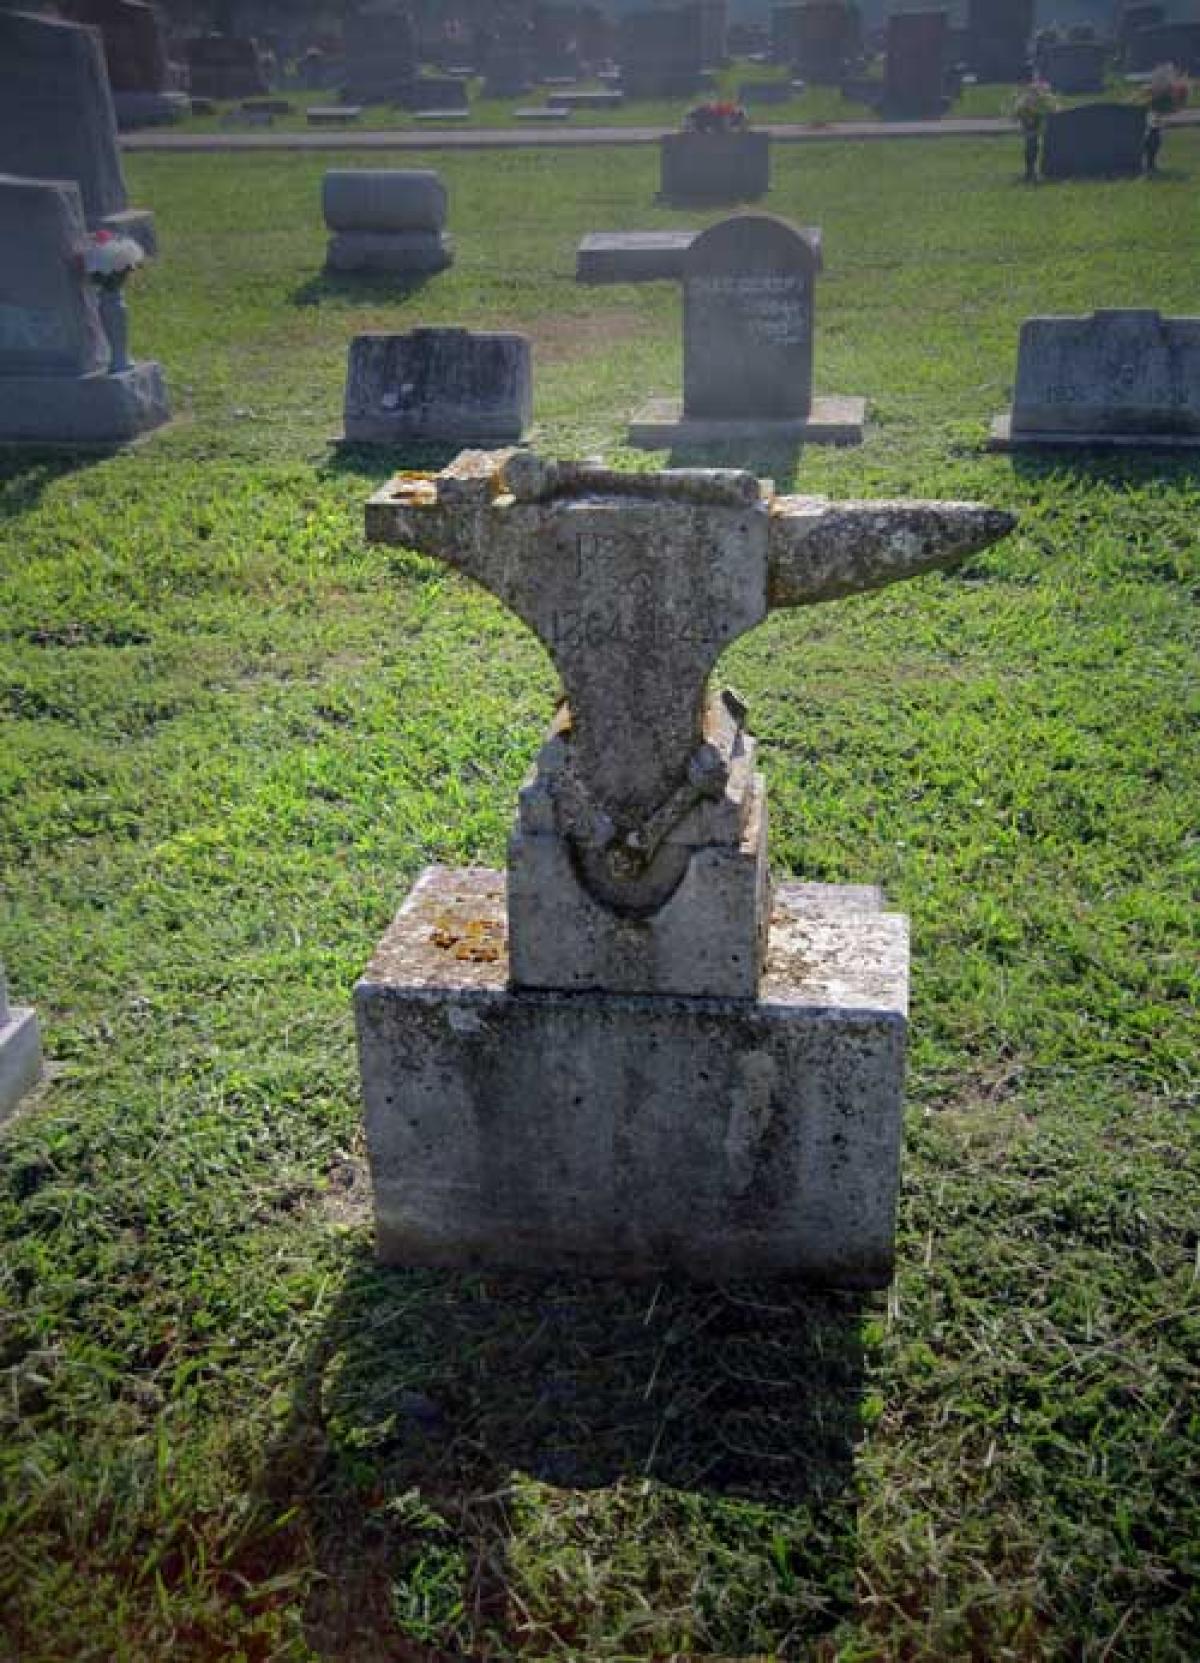 OK, Grove, Headstone Symbols and Meanings, Anvil and Hammer